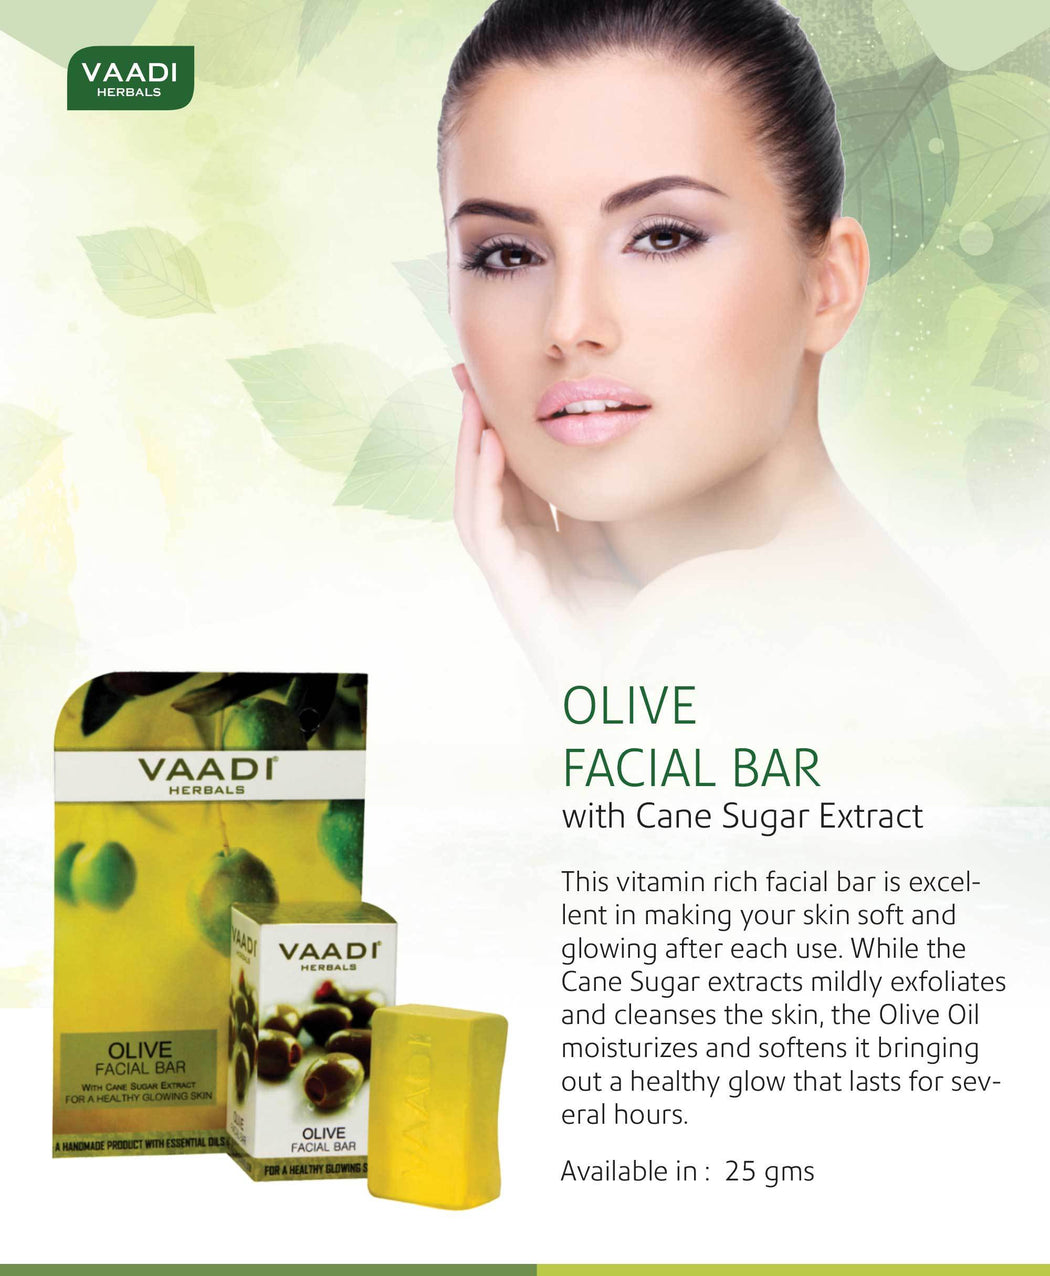 Organic Olive Facial Bar with Cane Sugar Extract - Exfoliates and Cleanses the Skin (4 x 25 gms/0.9 oz)